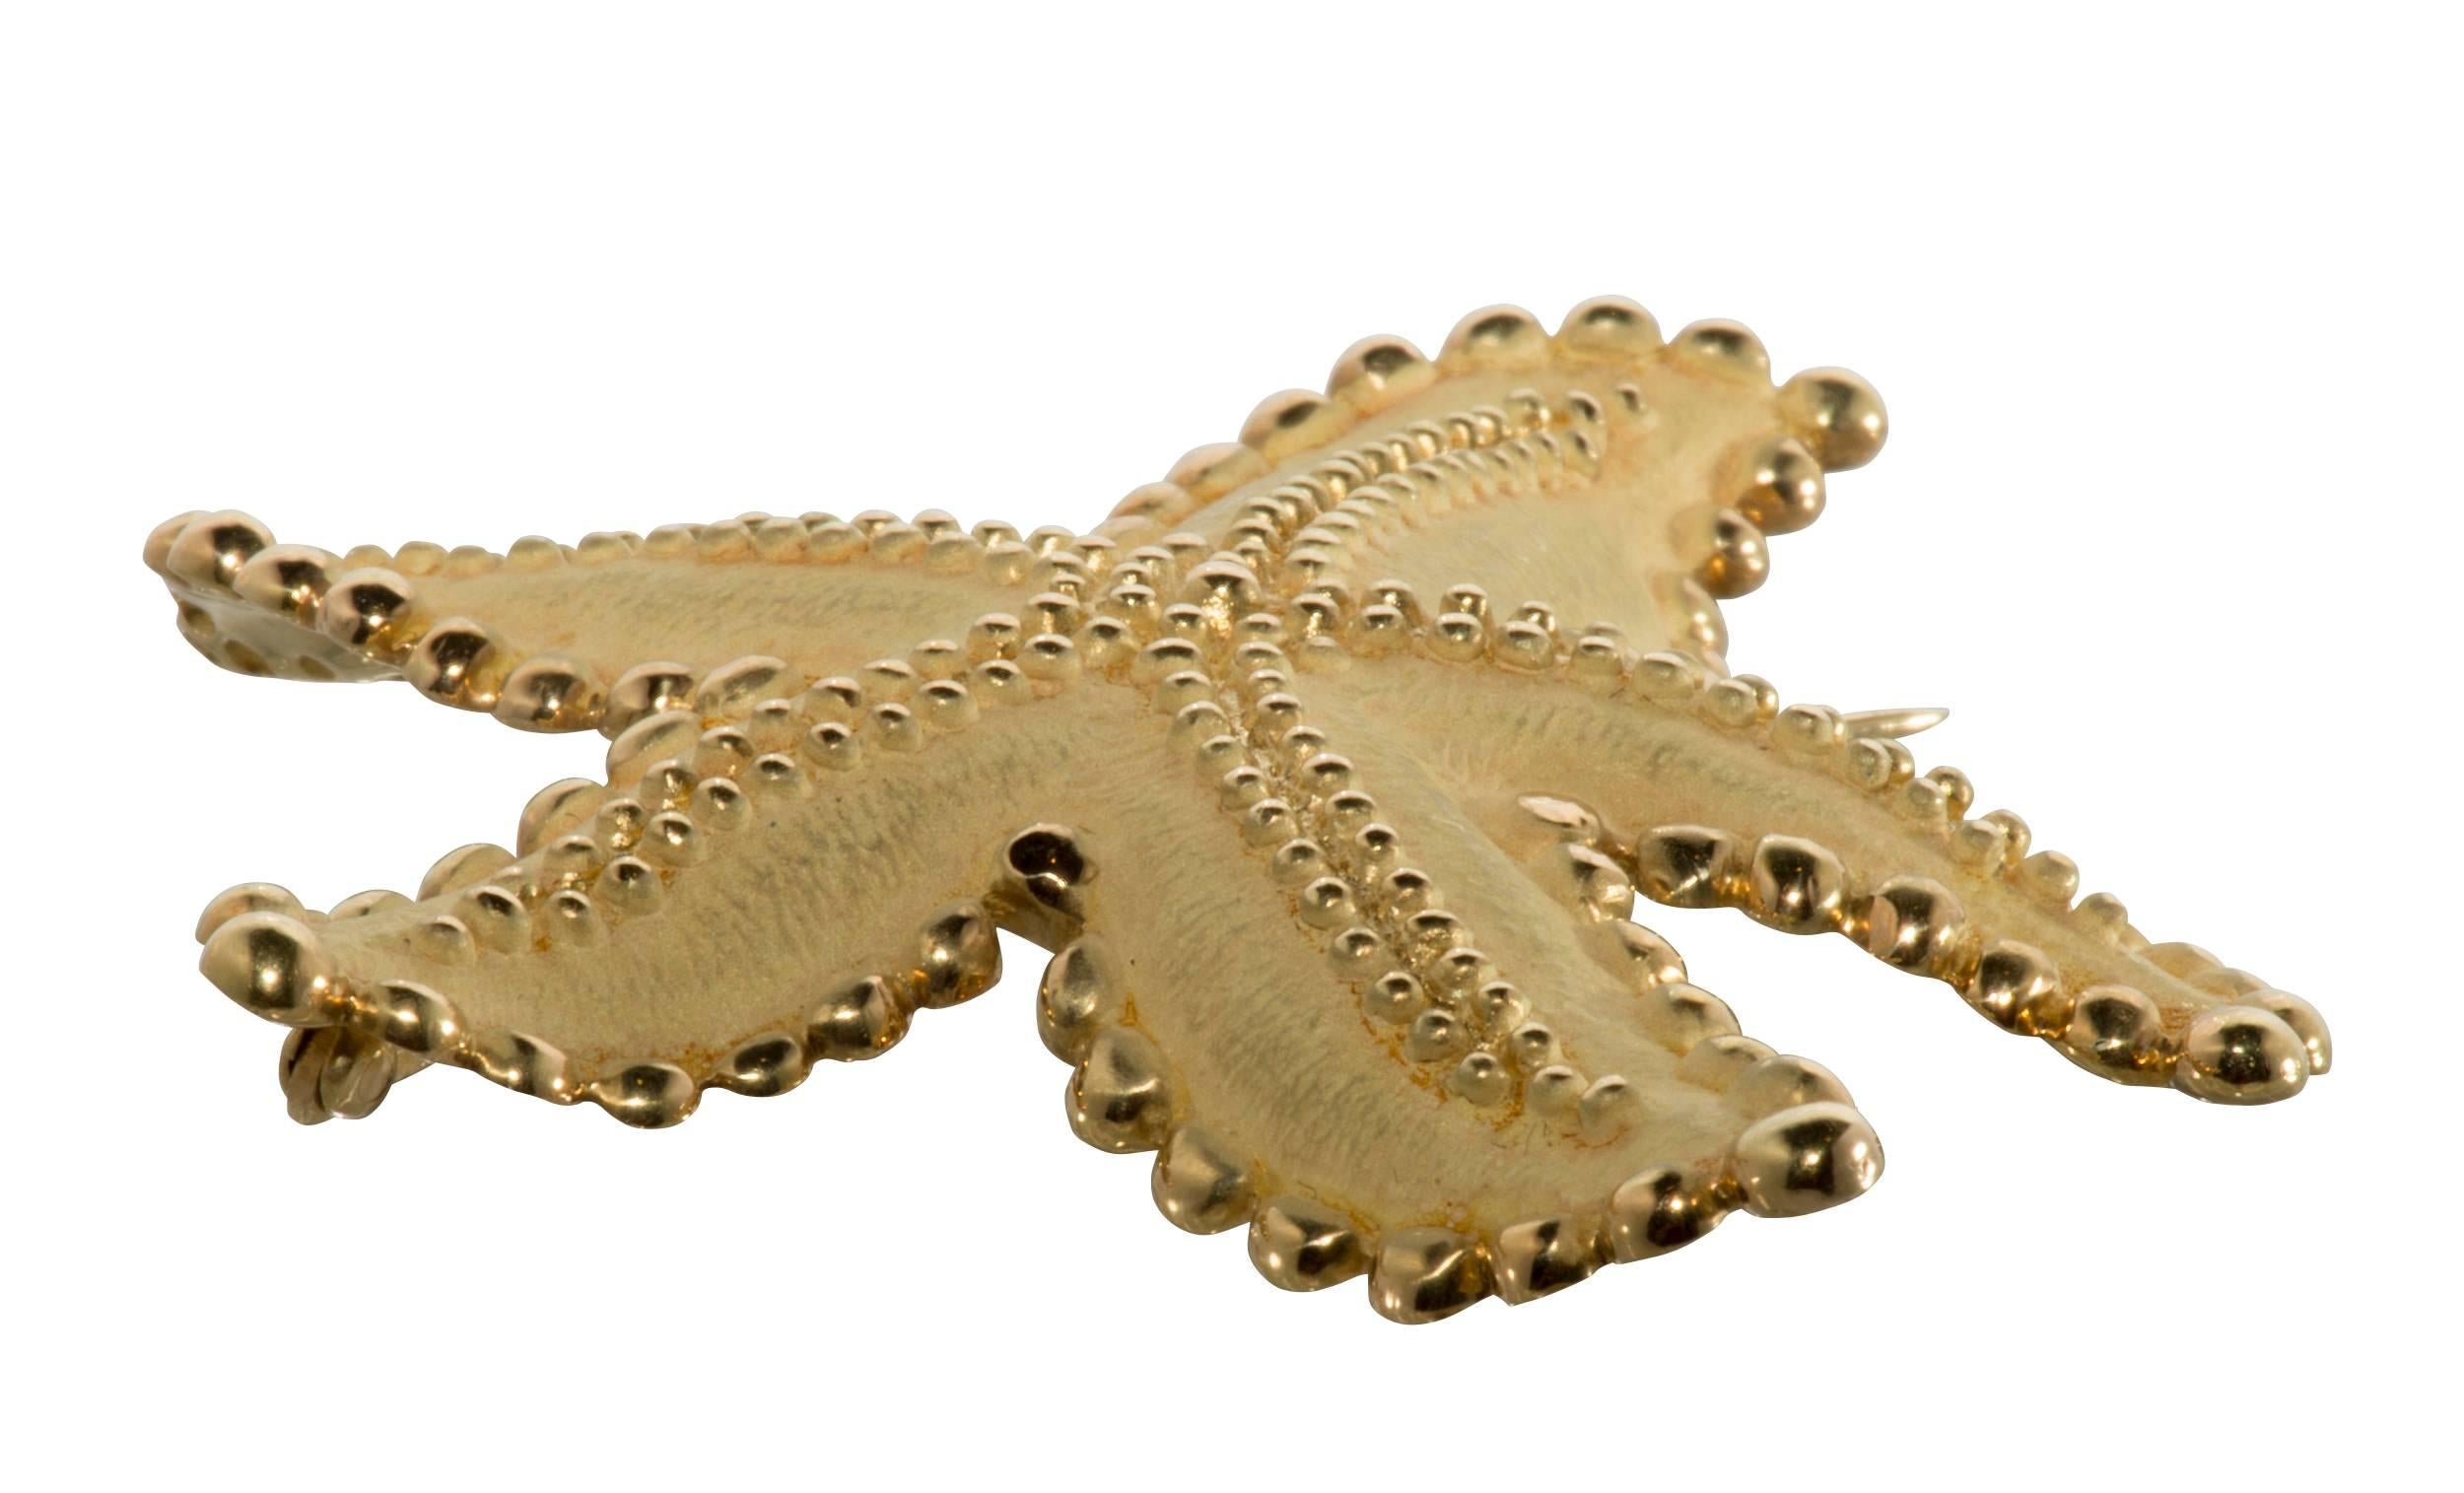 This is a beautiful starfish brooch made of 18k yellow gold.